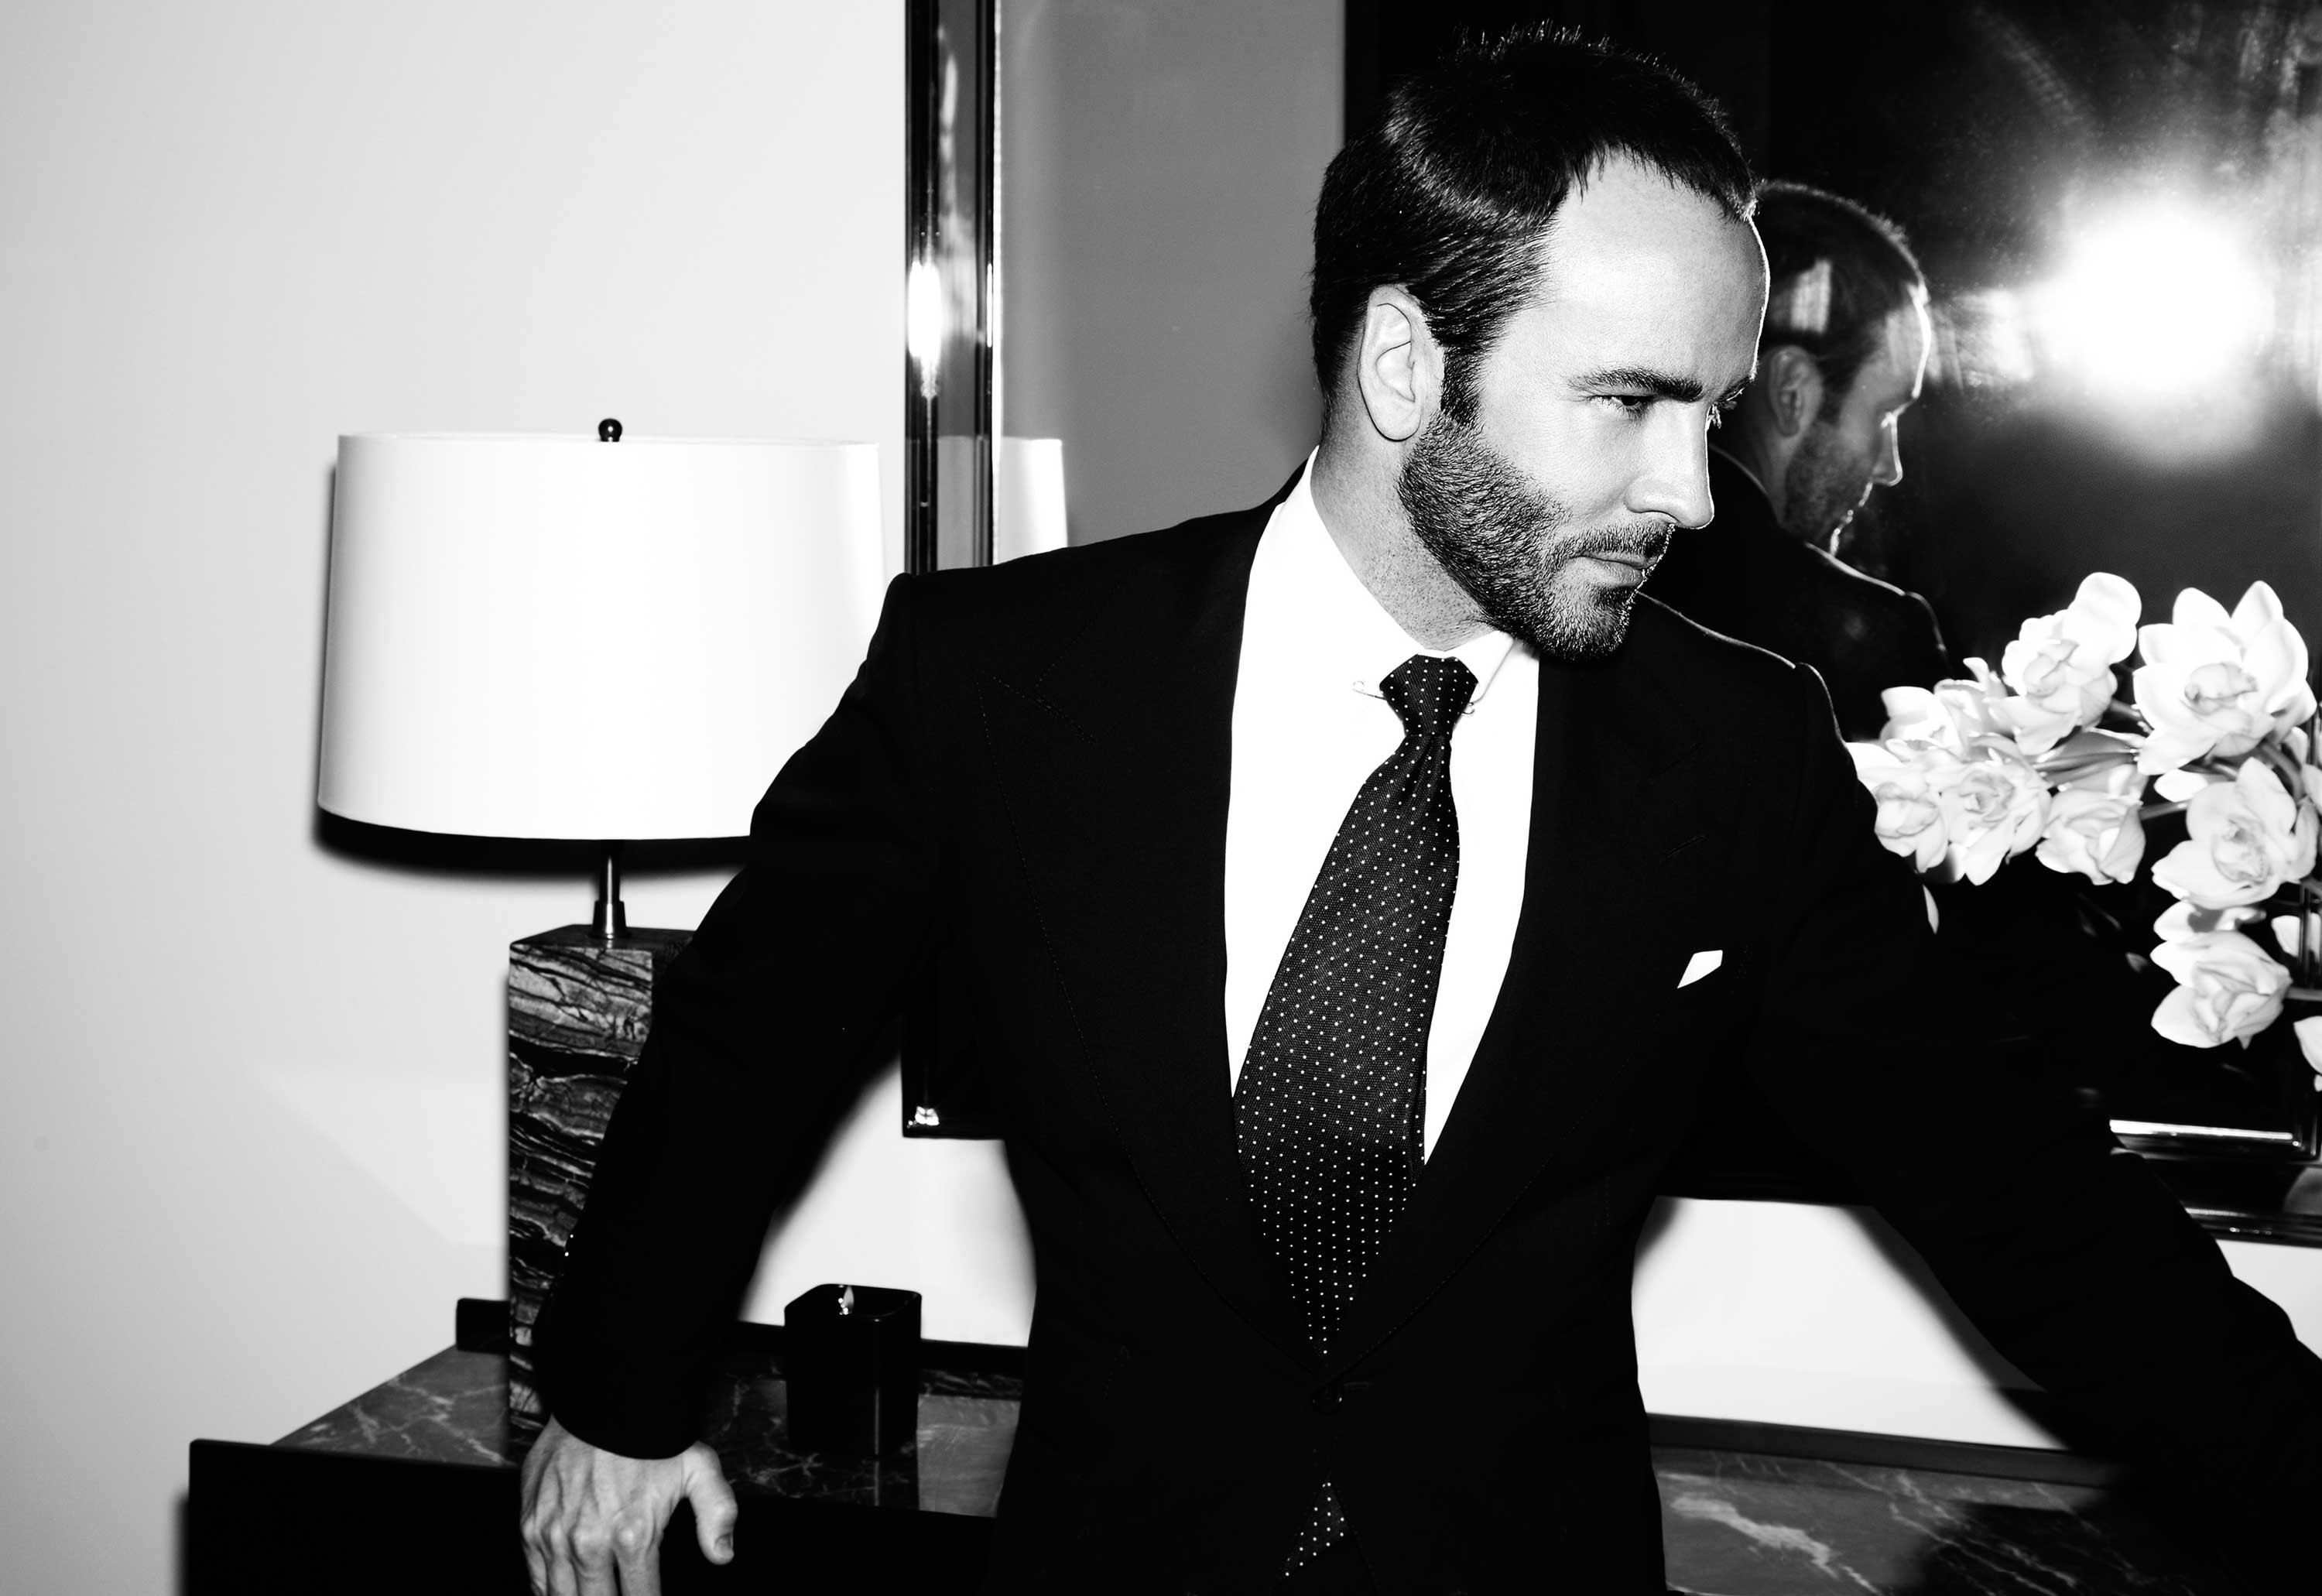 What’s a fashion designer? Says Tom Ford: ‘We’re dictators’ (SIMON PERRY)